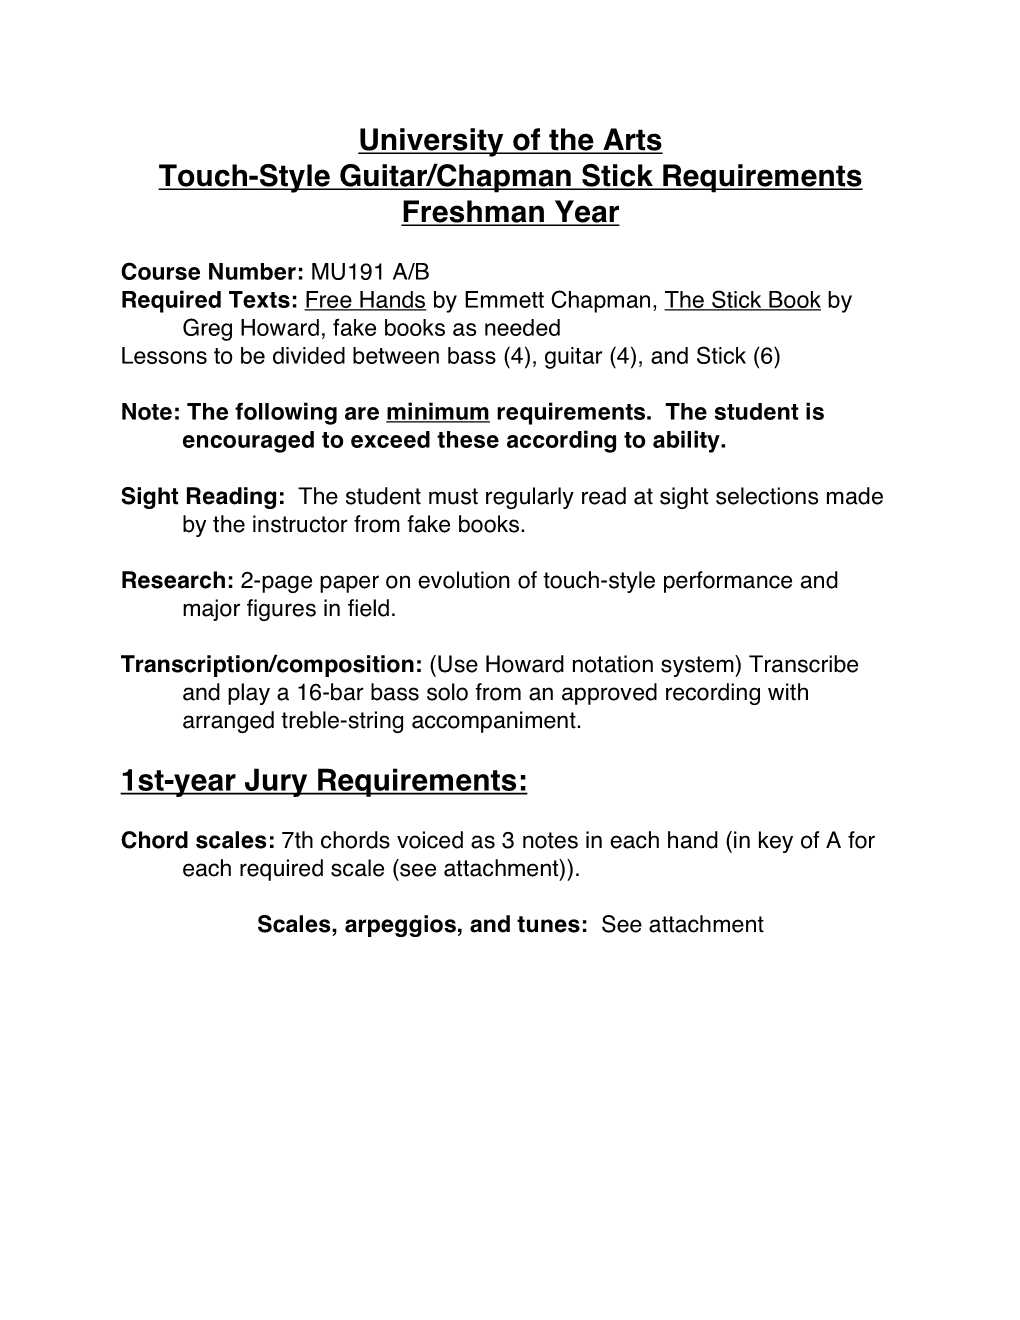 University of the Arts Touch-Style Guitar/Chapman Stick Requirements Freshman Year